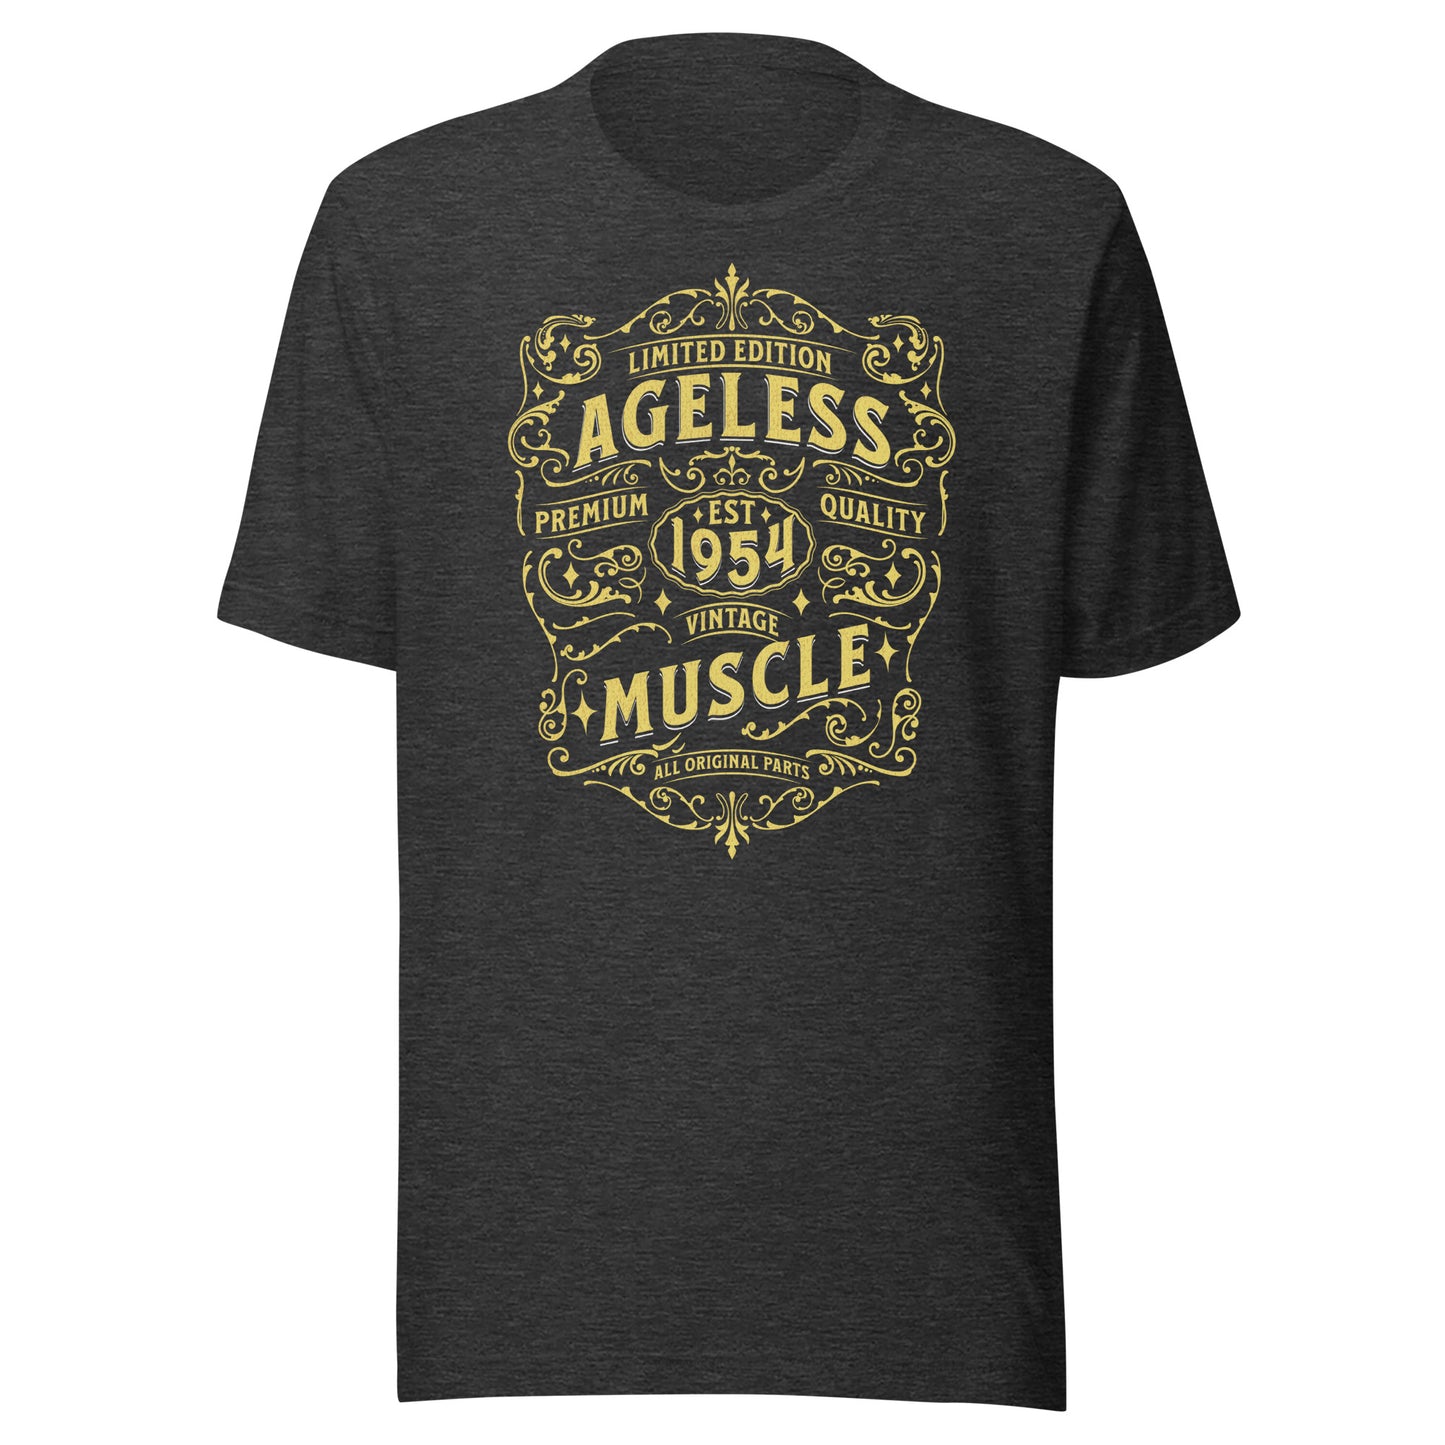 Ageless Muscle: Limited Edition Unisex T-shirt